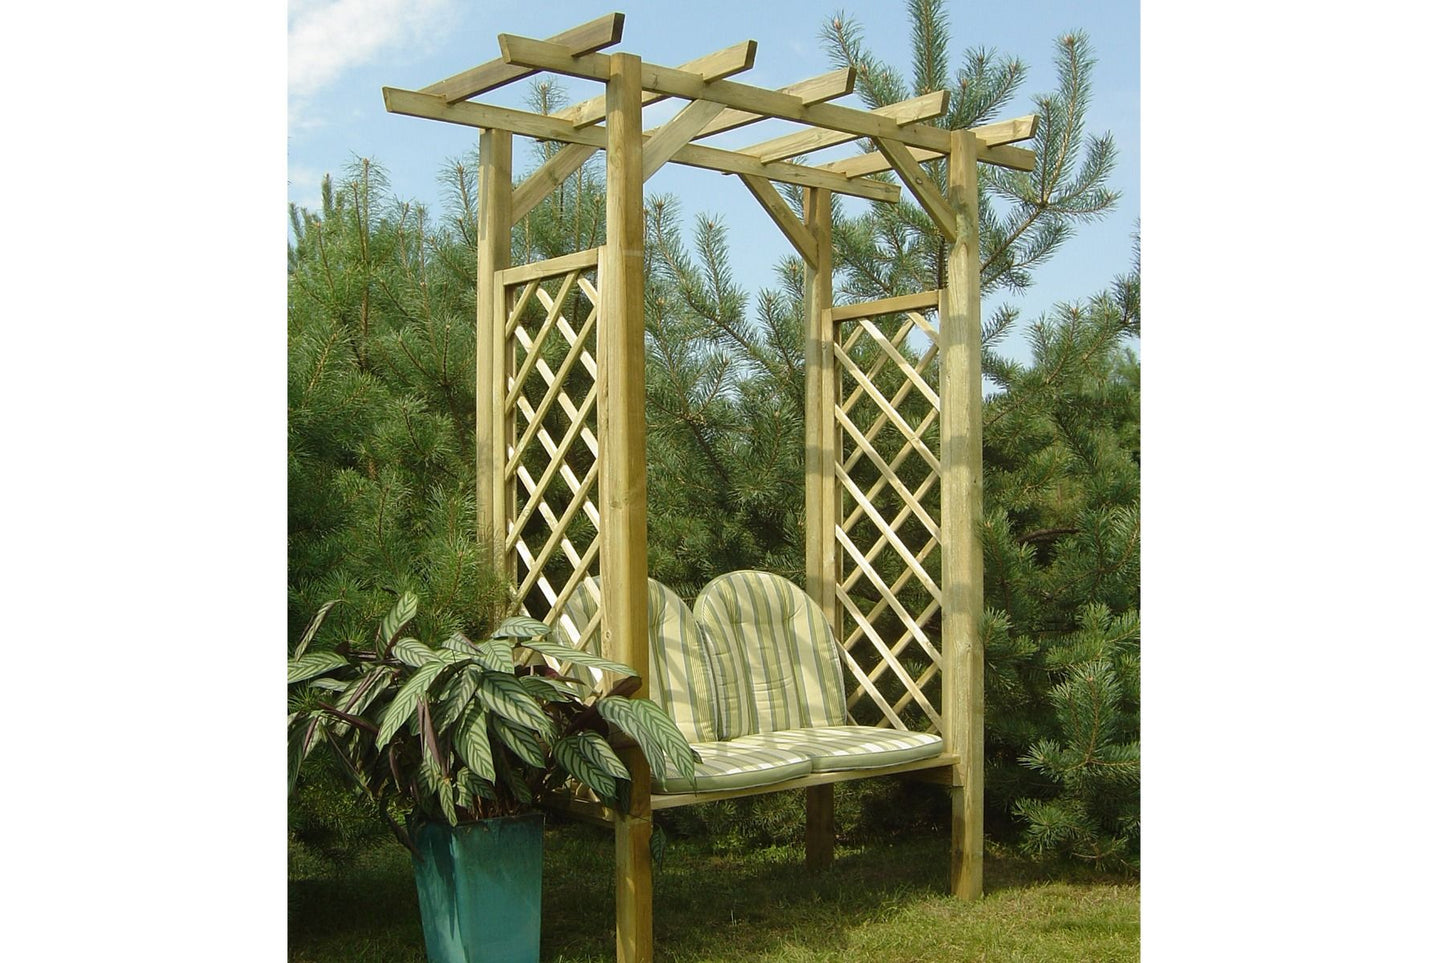 Straight Pergola with seating - complete with seating